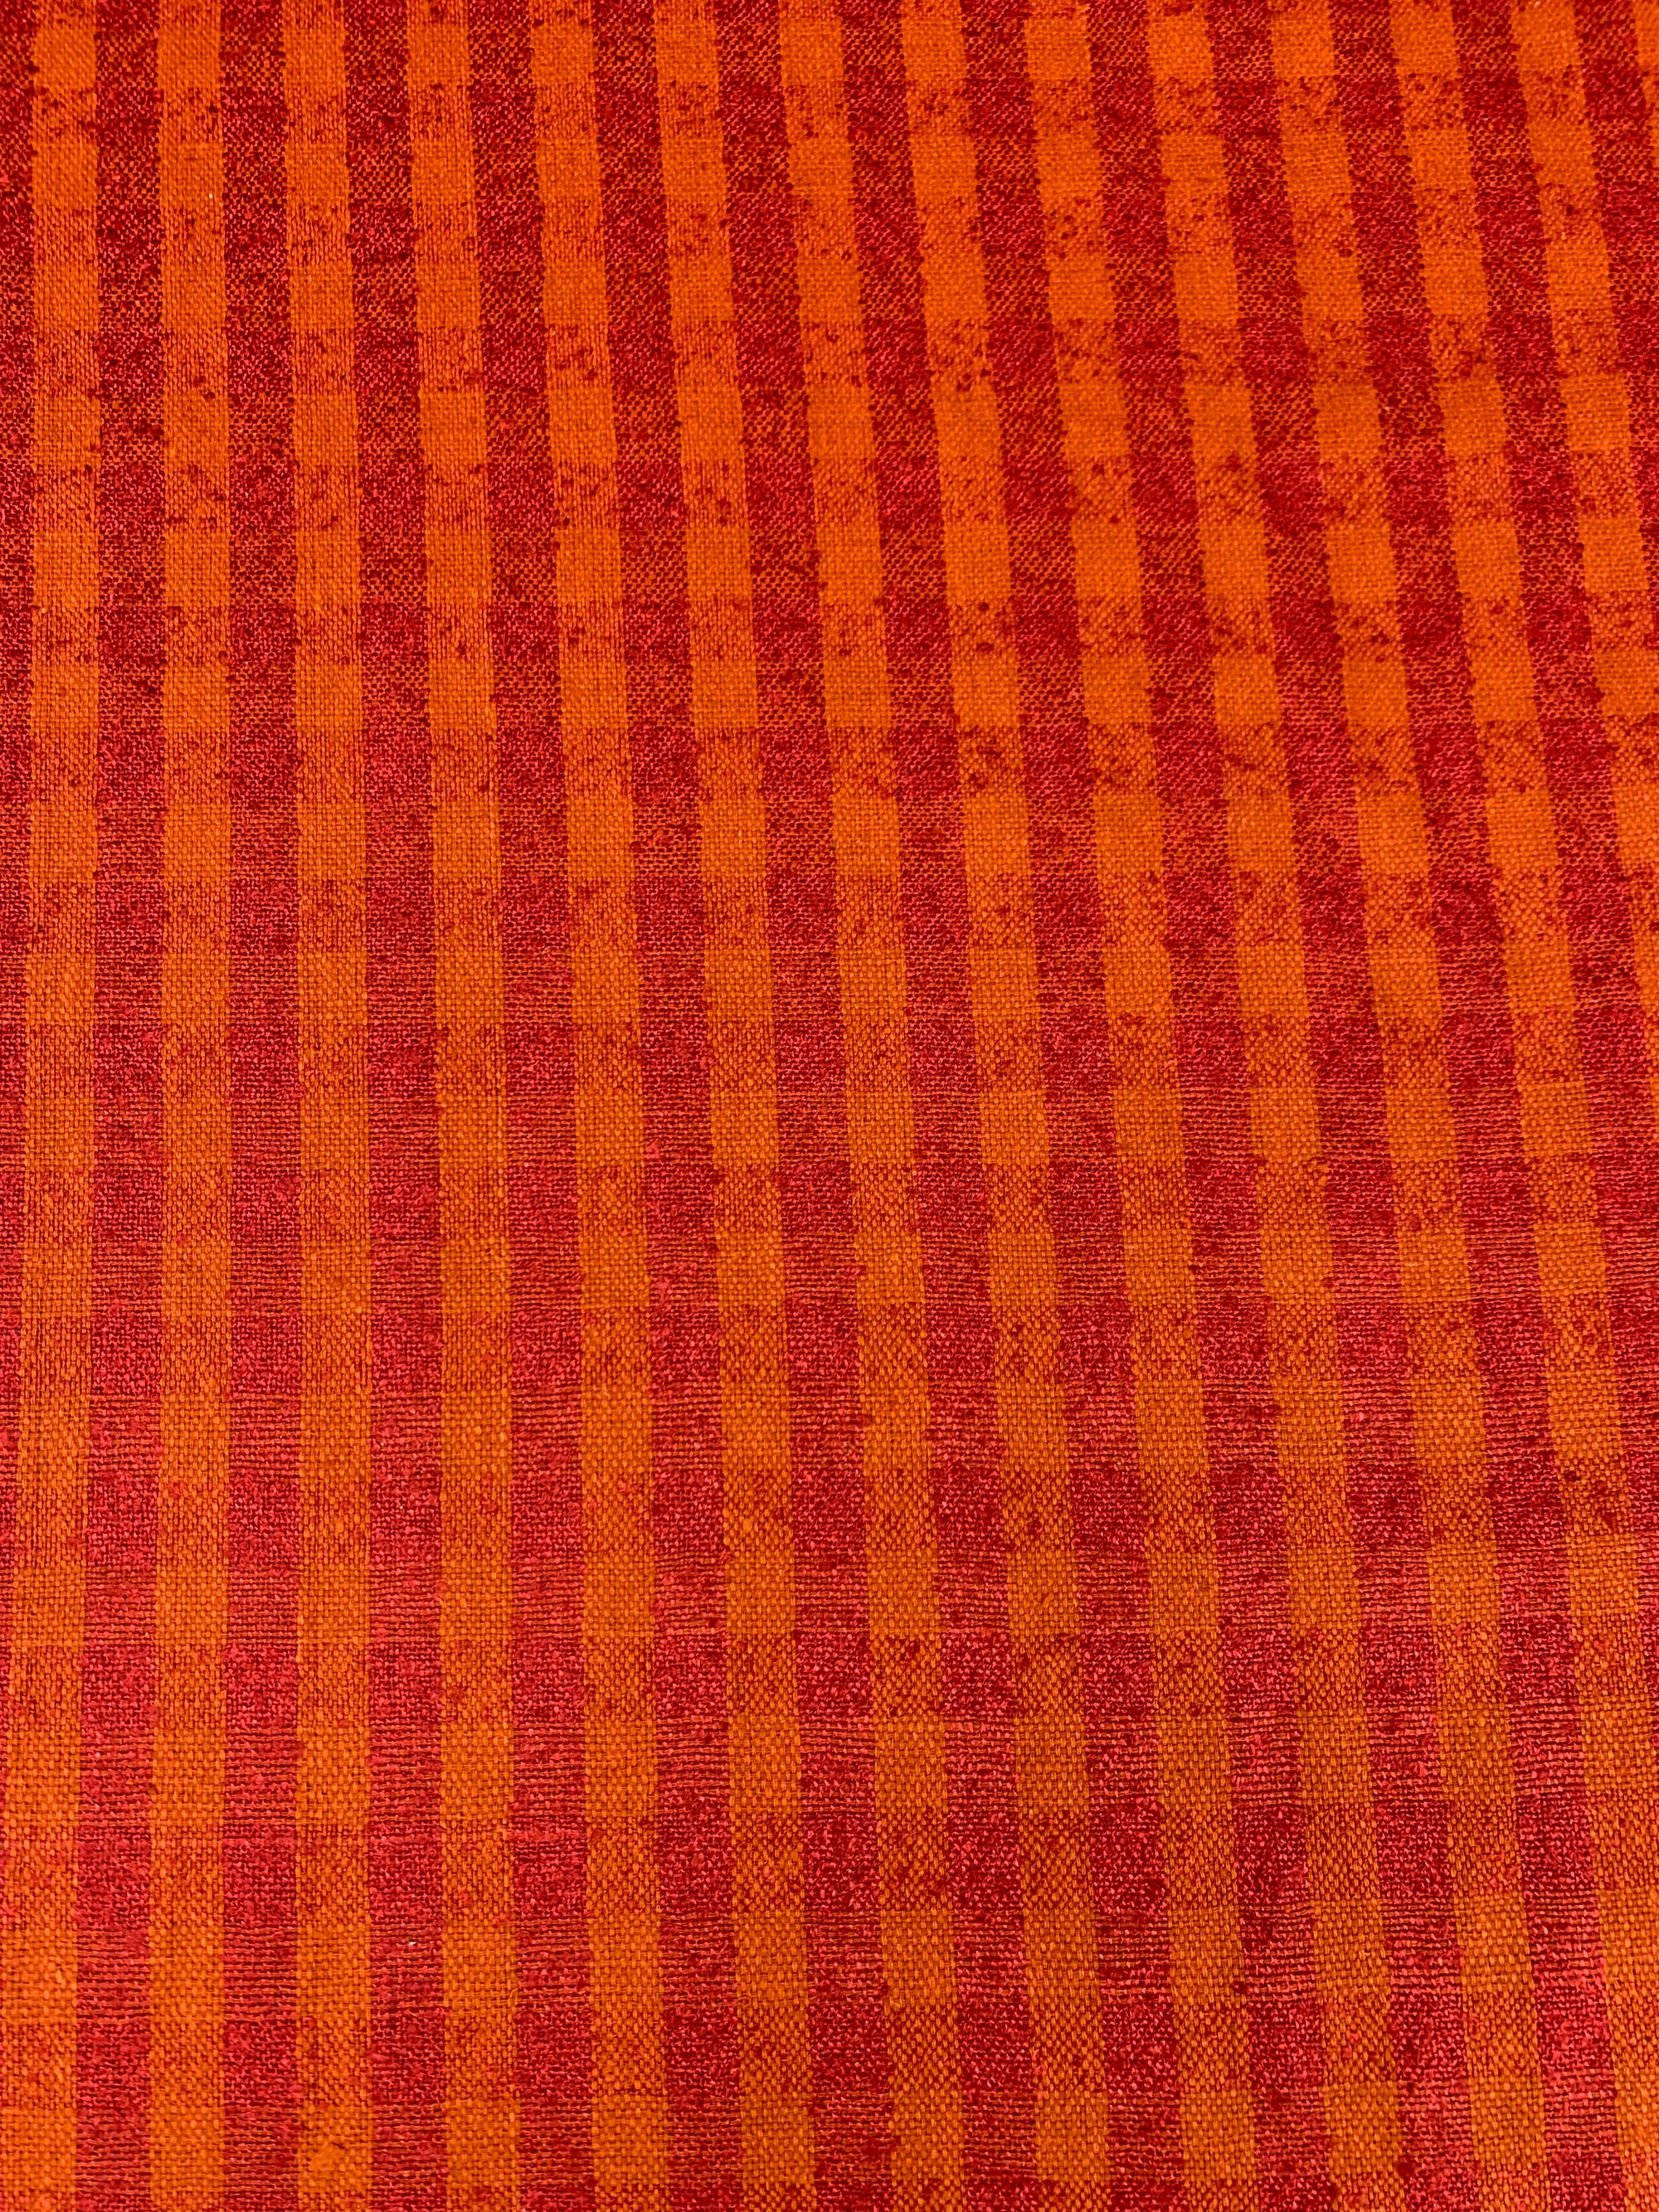 close up of raw silk in a orange and red check